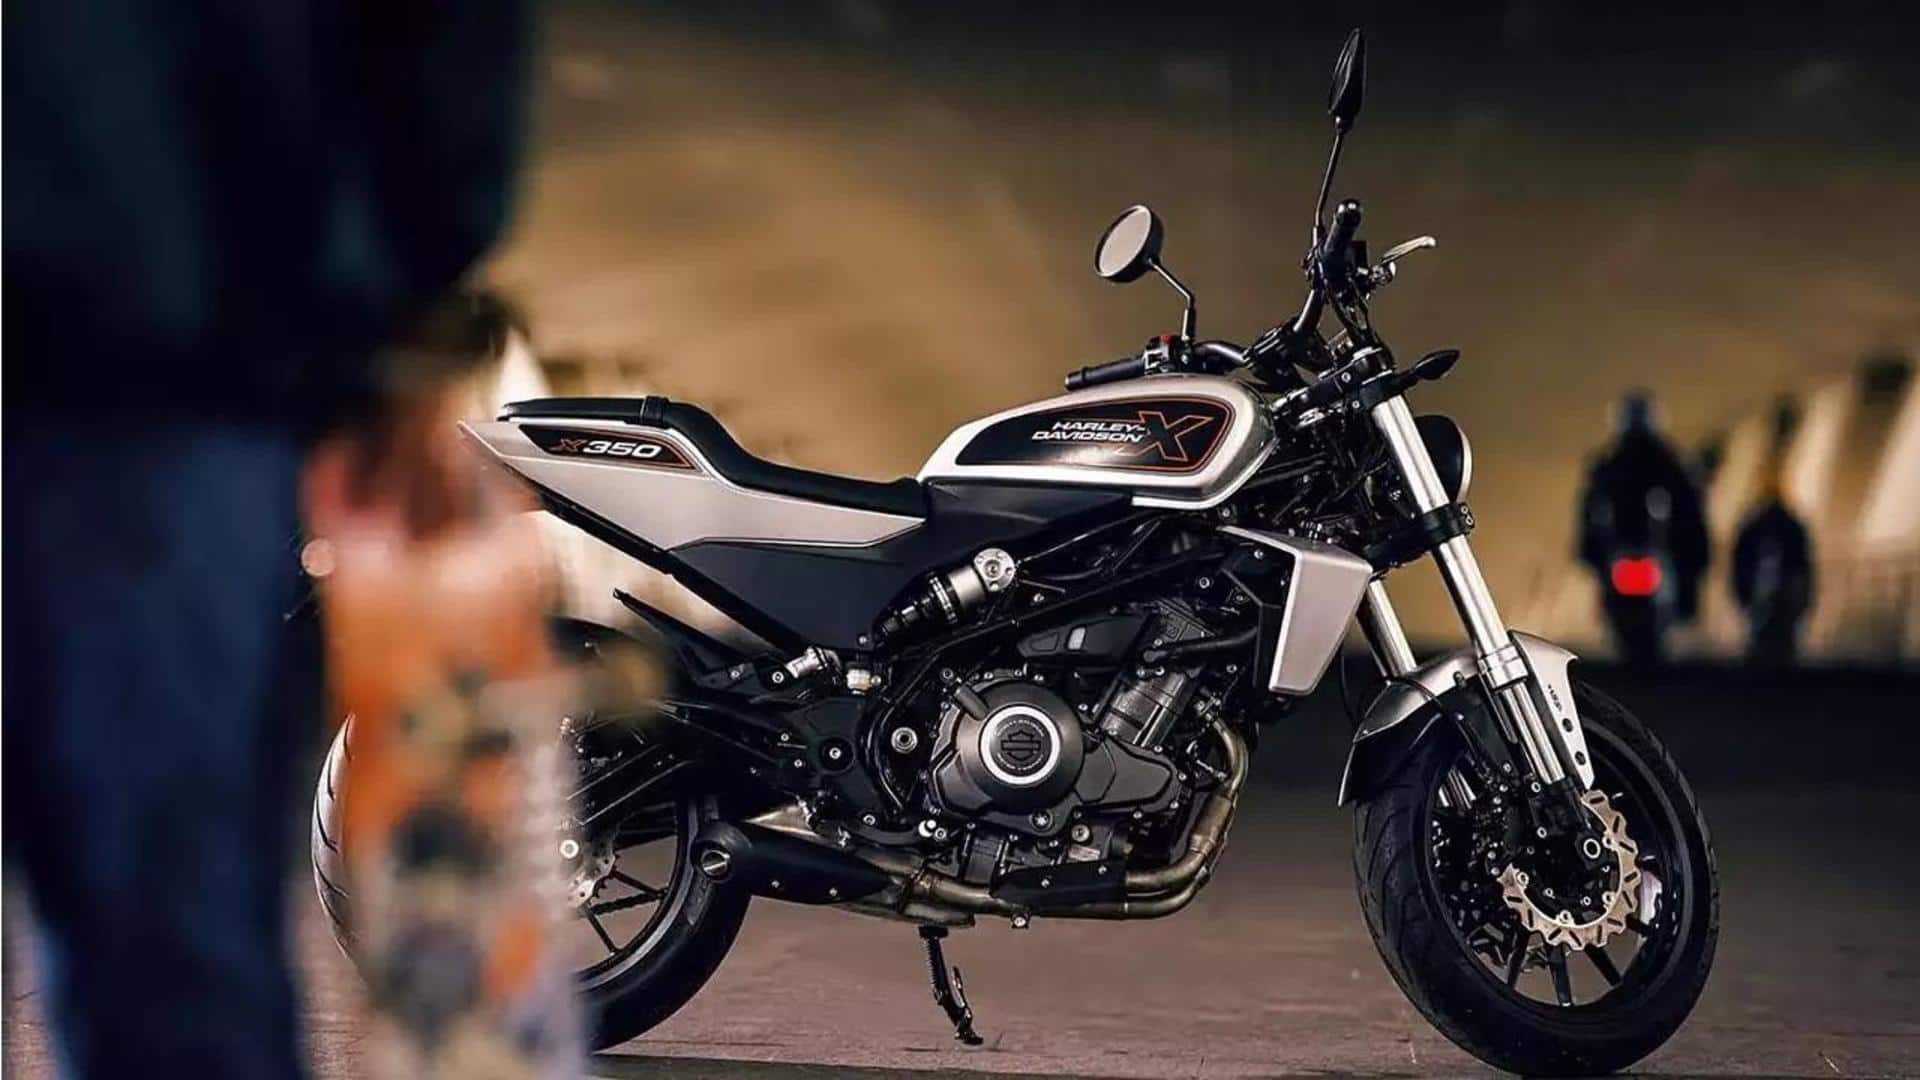 Meet X350, Harley-Davidson's cheapest motorcycle ever; India launch soon